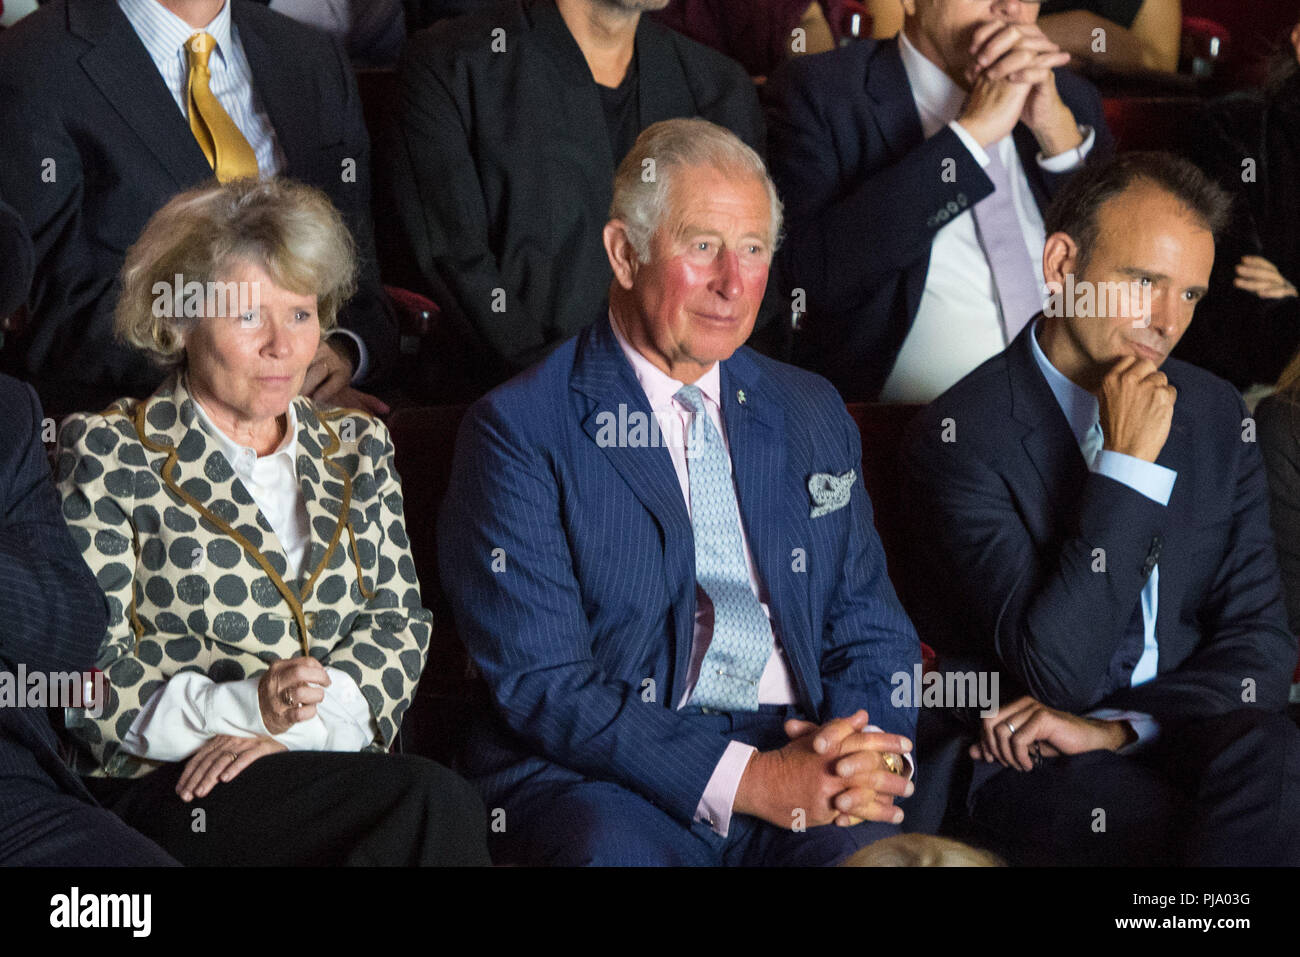 The Prince of Wales watches a performance alongside actress Imelda Staunton and Old Vic Artistic Director Matthew Warchus at the Old Vic Theatre, in central London, during a visit to mark the theatre's 200th anniversary. Stock Photo